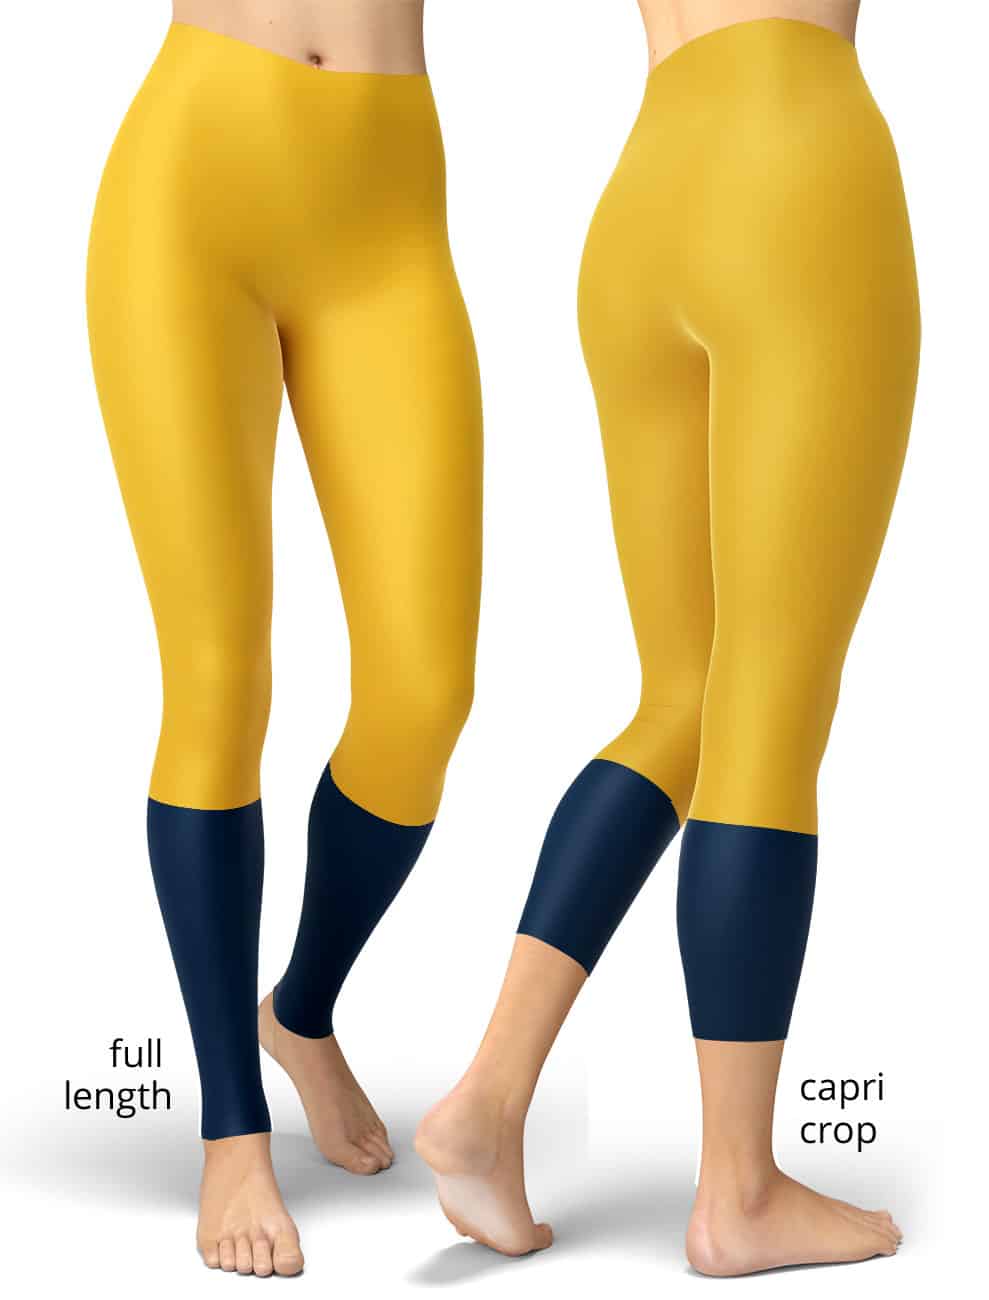 Notre Dame students hold 'Leggings Day' to protest letter from